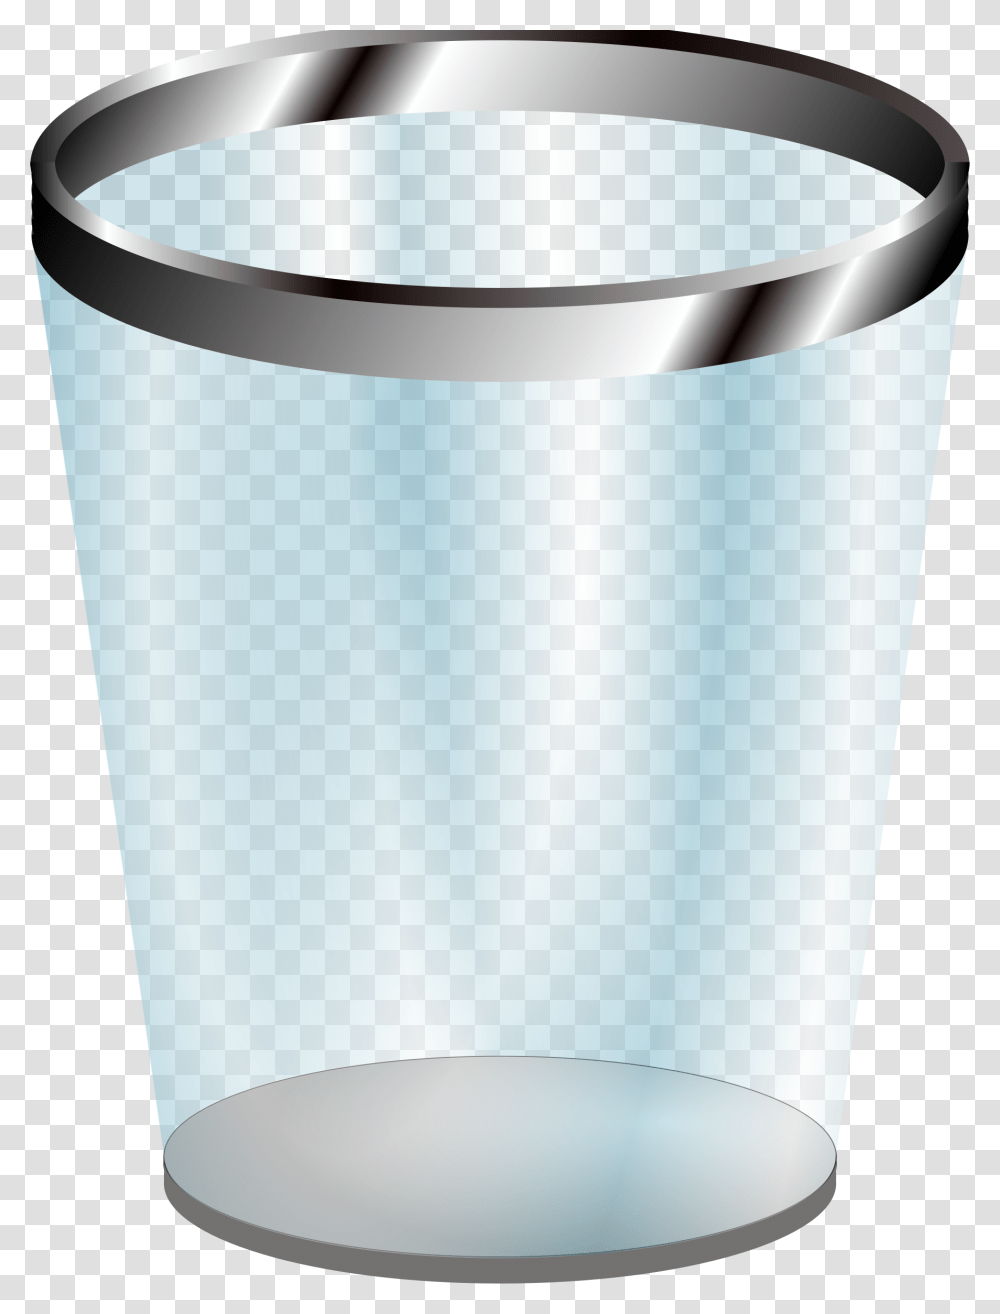 Recycle Bin, Lamp, Shaker, Bottle, Glass Transparent Png